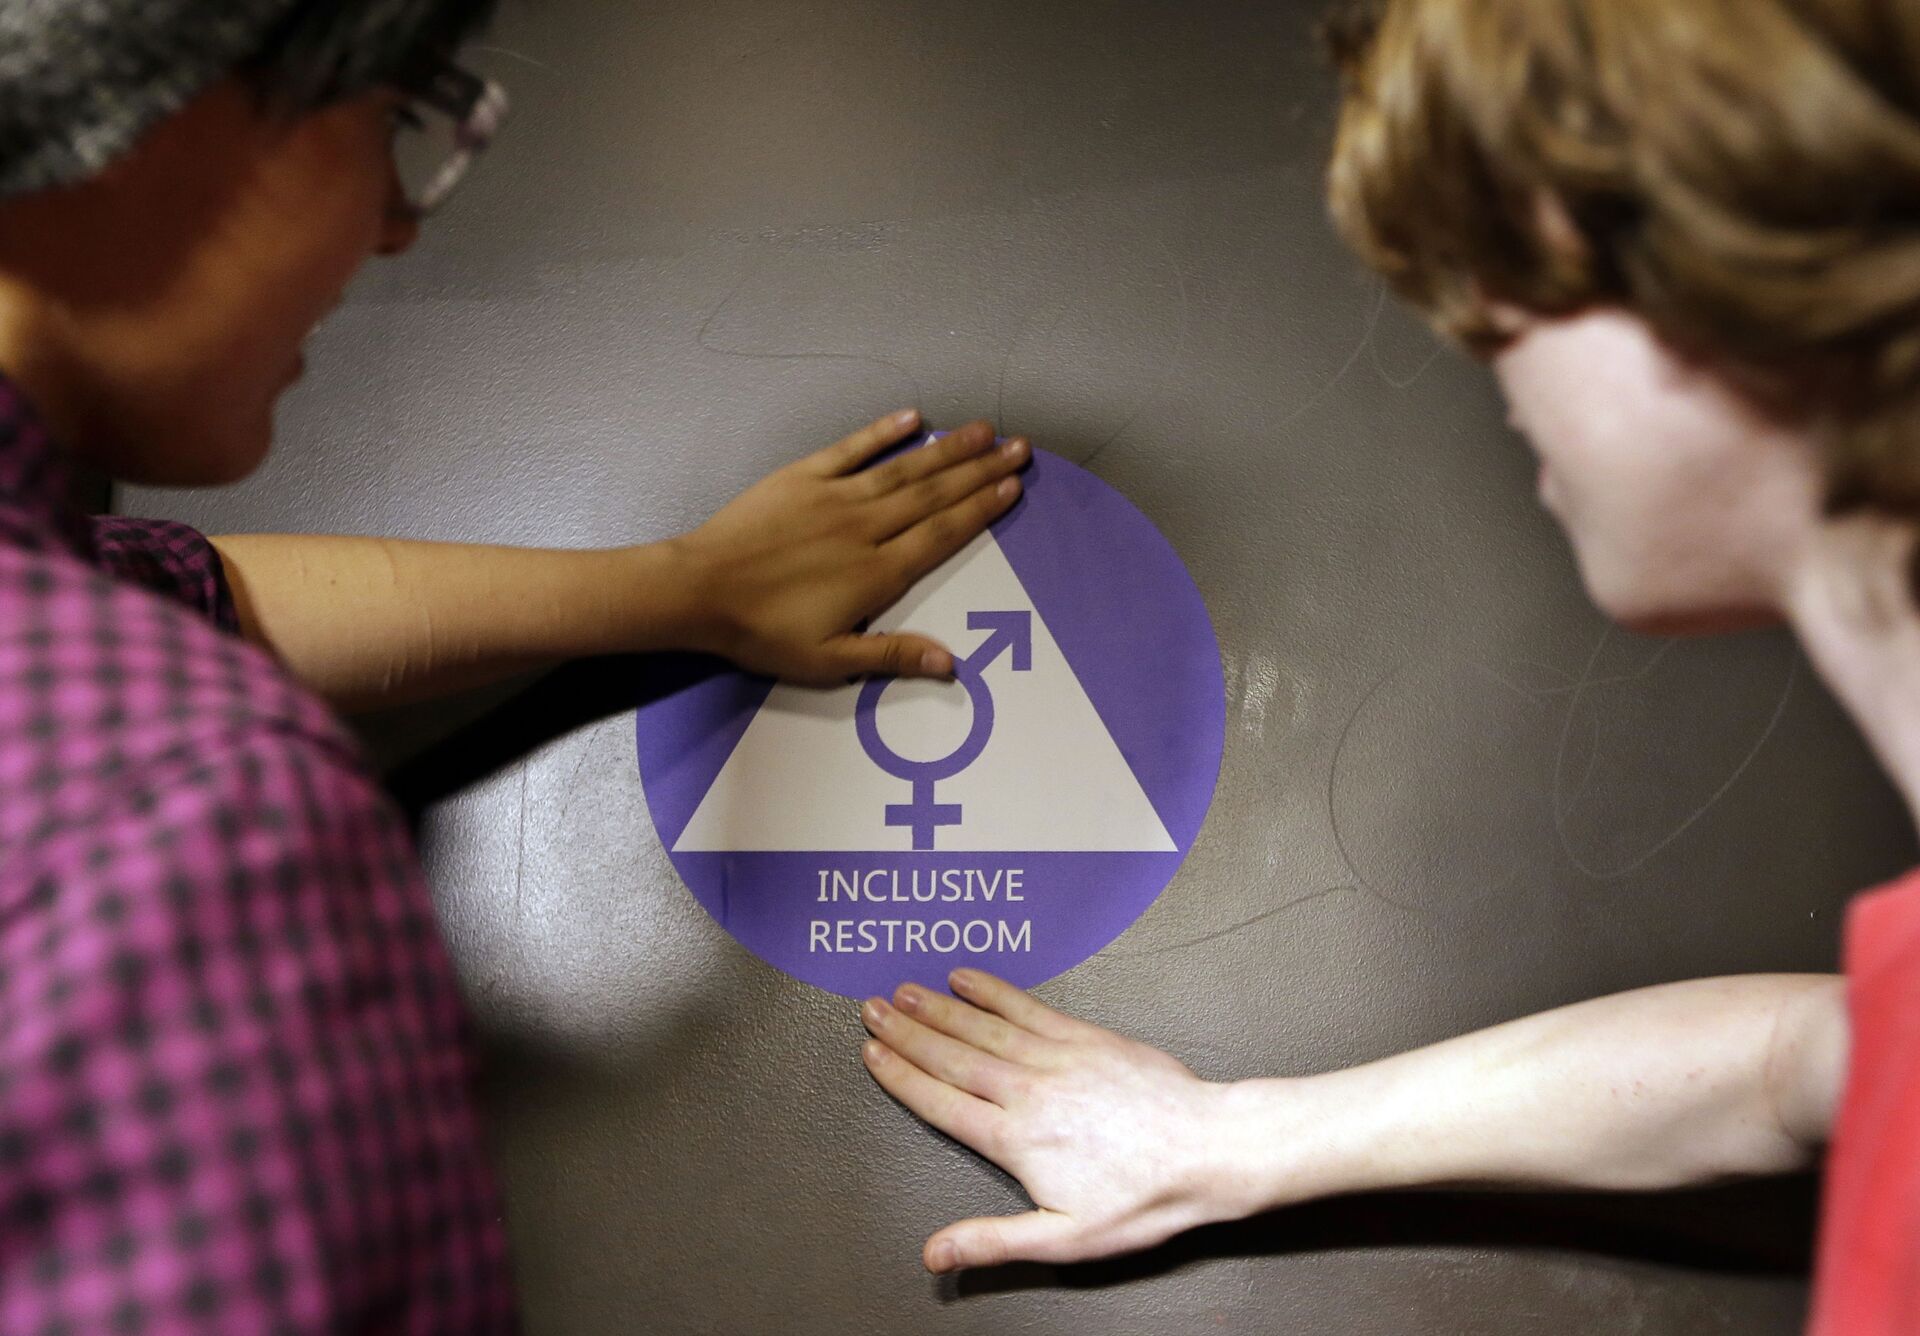 Destin Cramer, left, and Noah Rice place a new sticker on the door at the ceremonial opening of a gender neutral bathroom at Nathan Hale high school Tuesday, May 17, 2016, in Seattle - Sputnik Africa, 1920, 28.07.2023